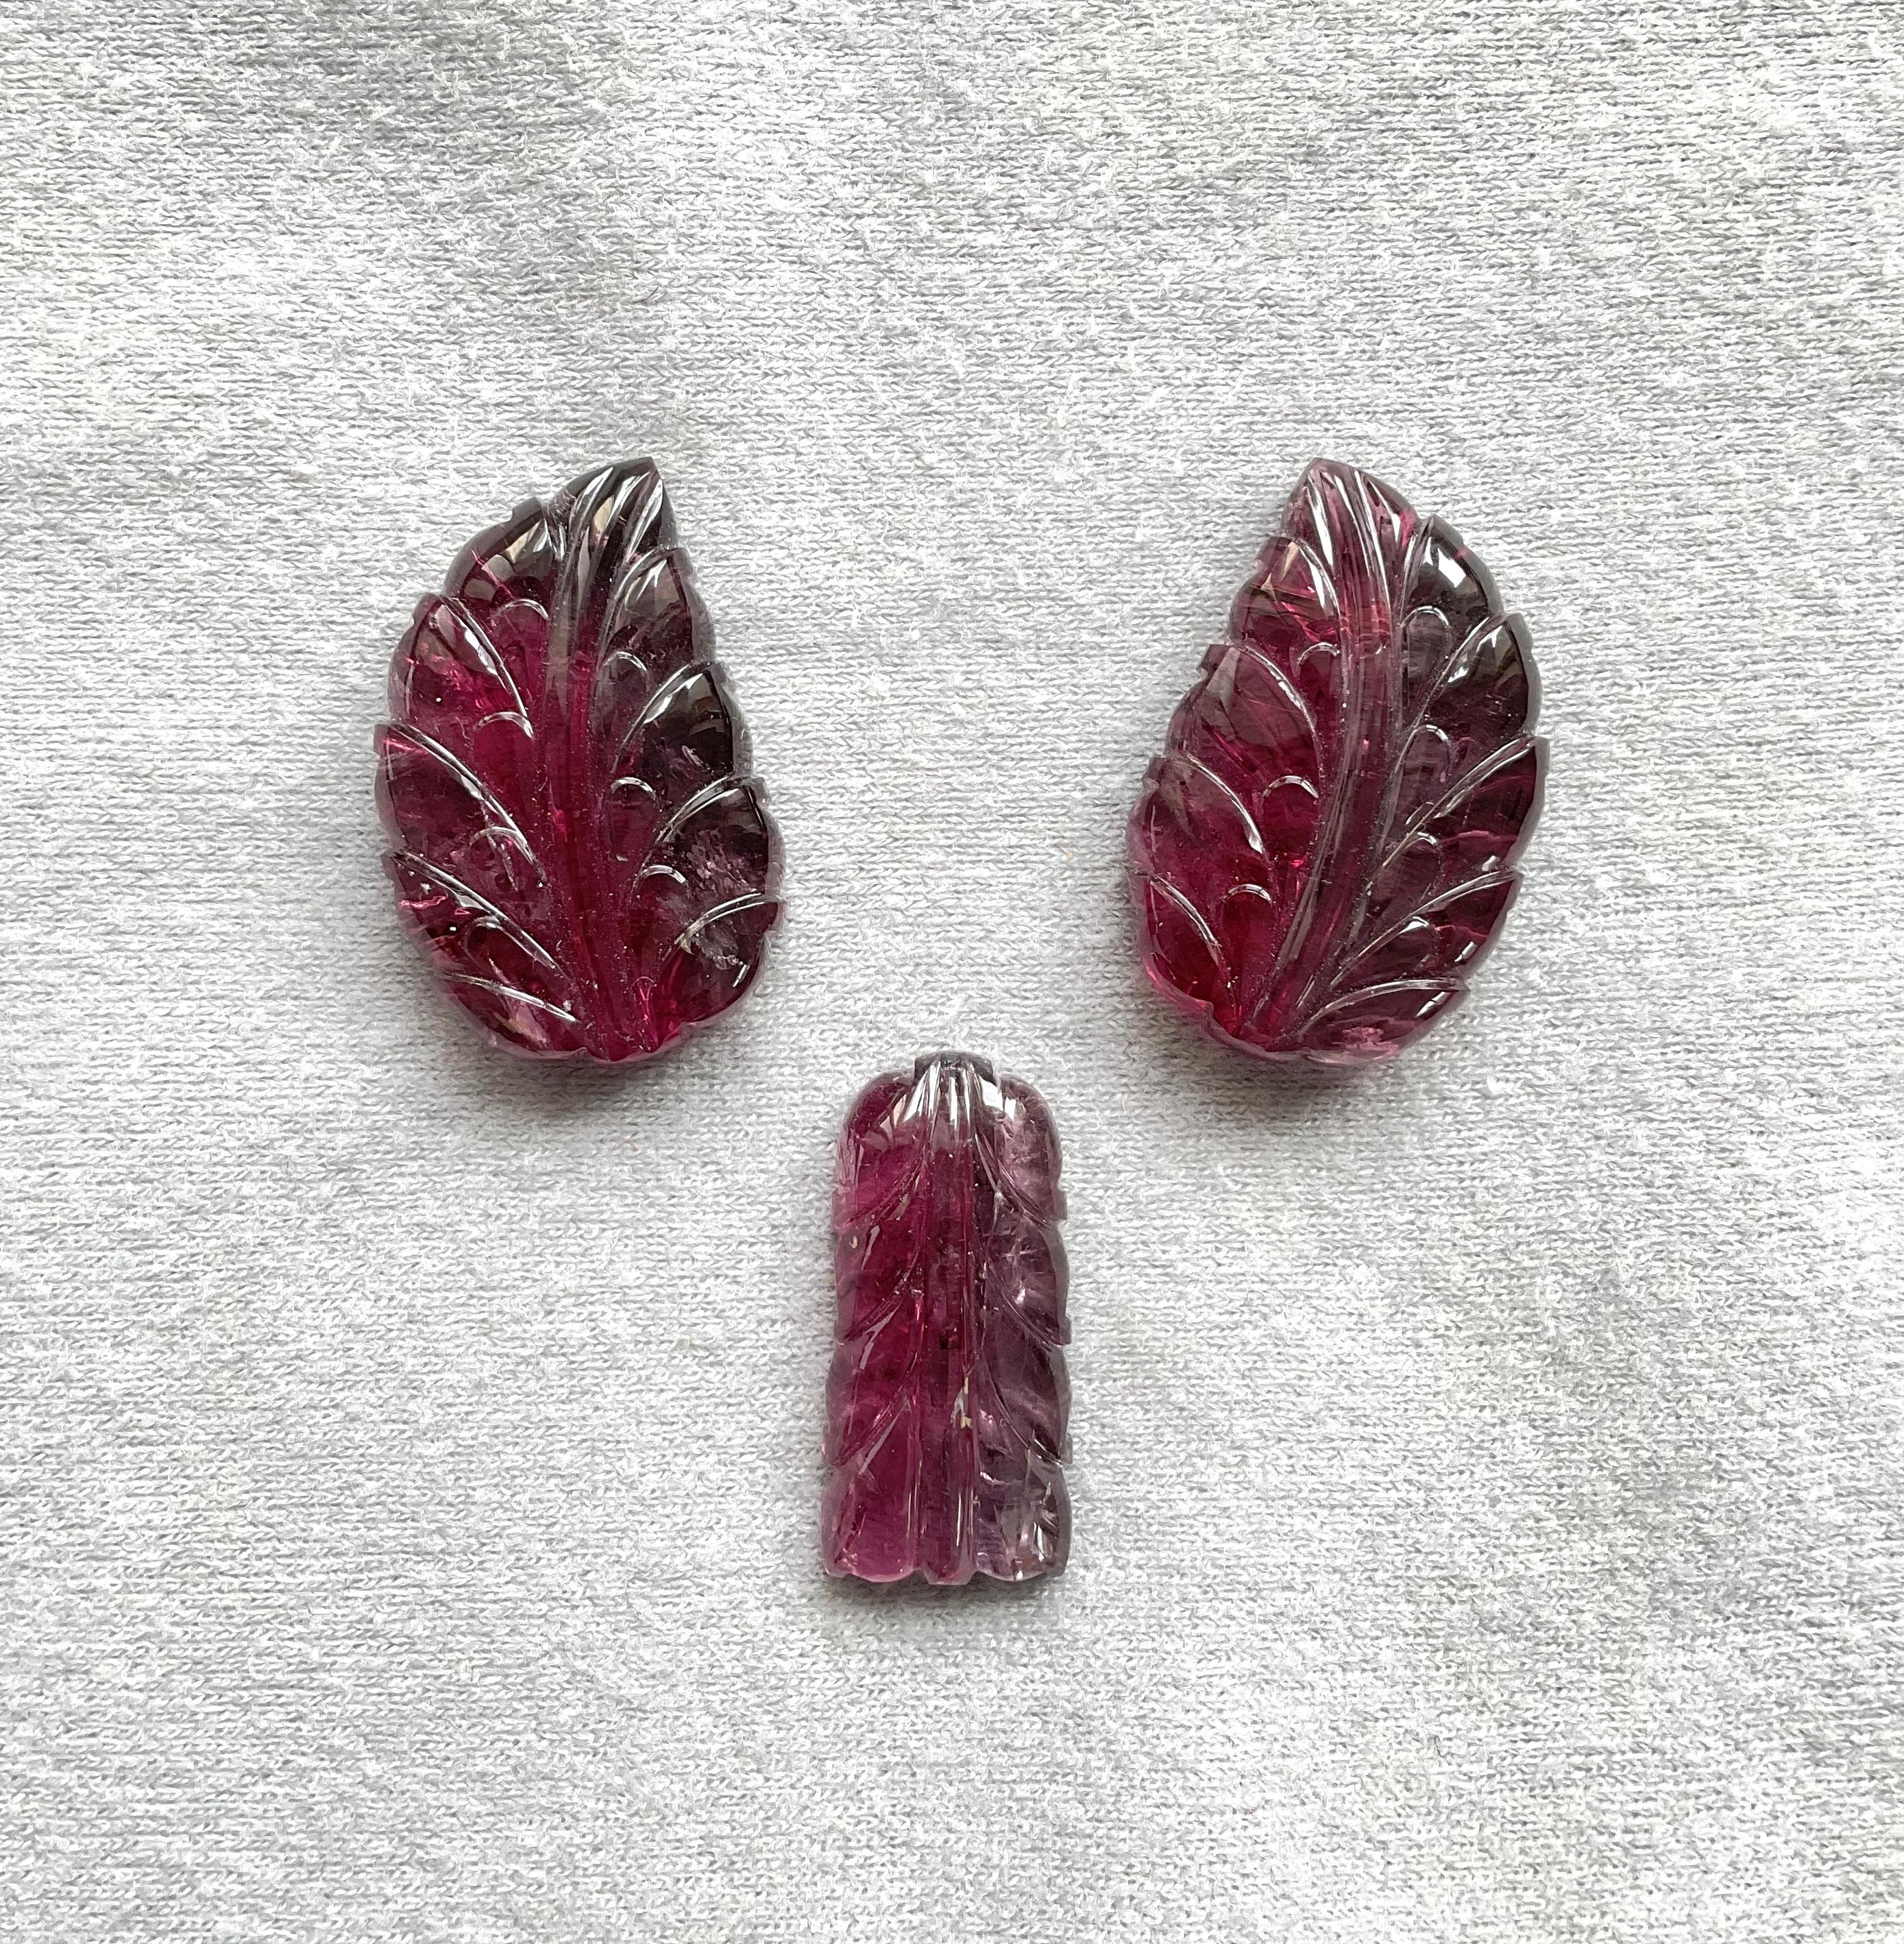 Women's or Men's 84.37 Carats Rubellite Tourmaline Carved Leaf 3 Pieces Fine jewelry Natural Gem For Sale